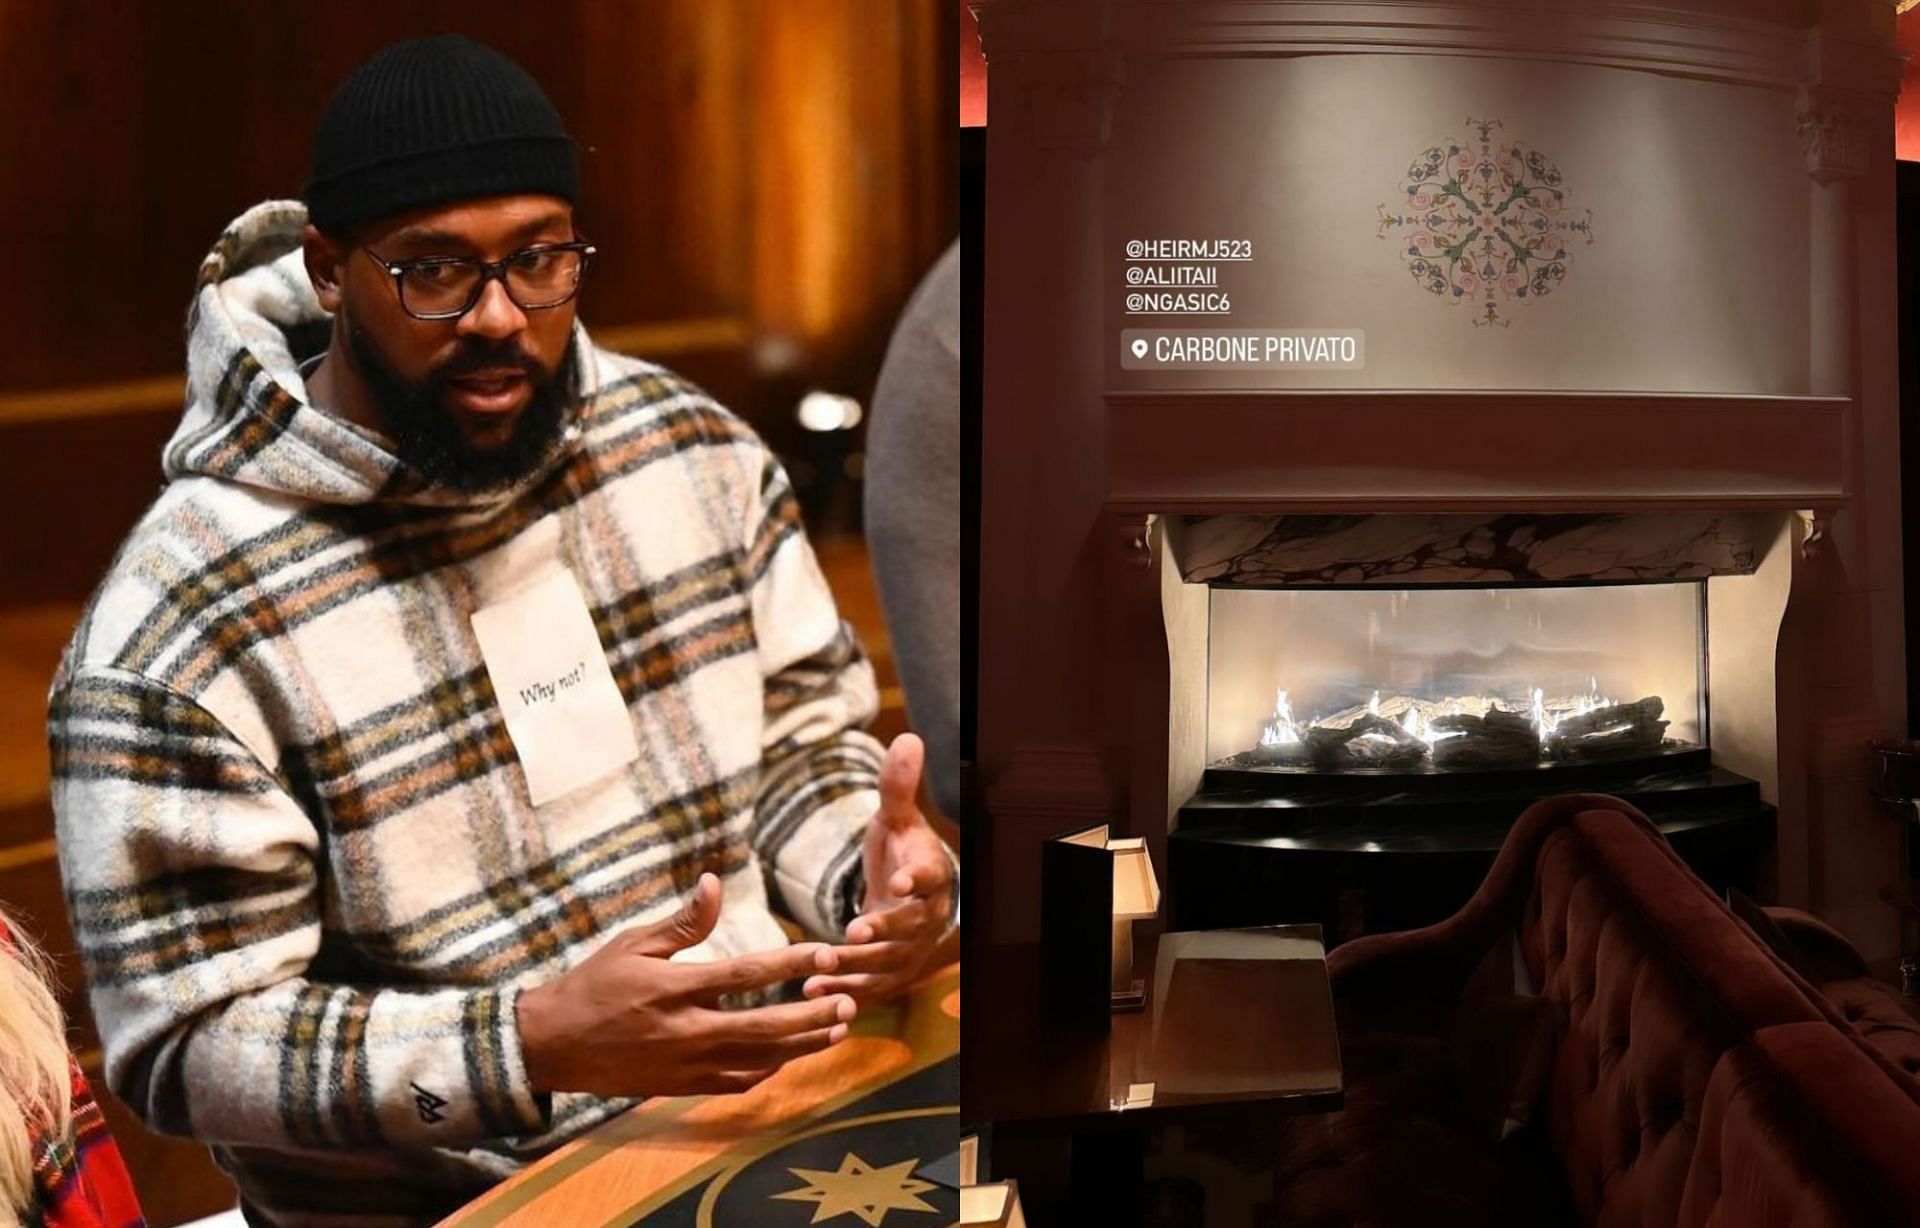 Marcus Jordan shows on his social media page a photo inside the Carbone Privato